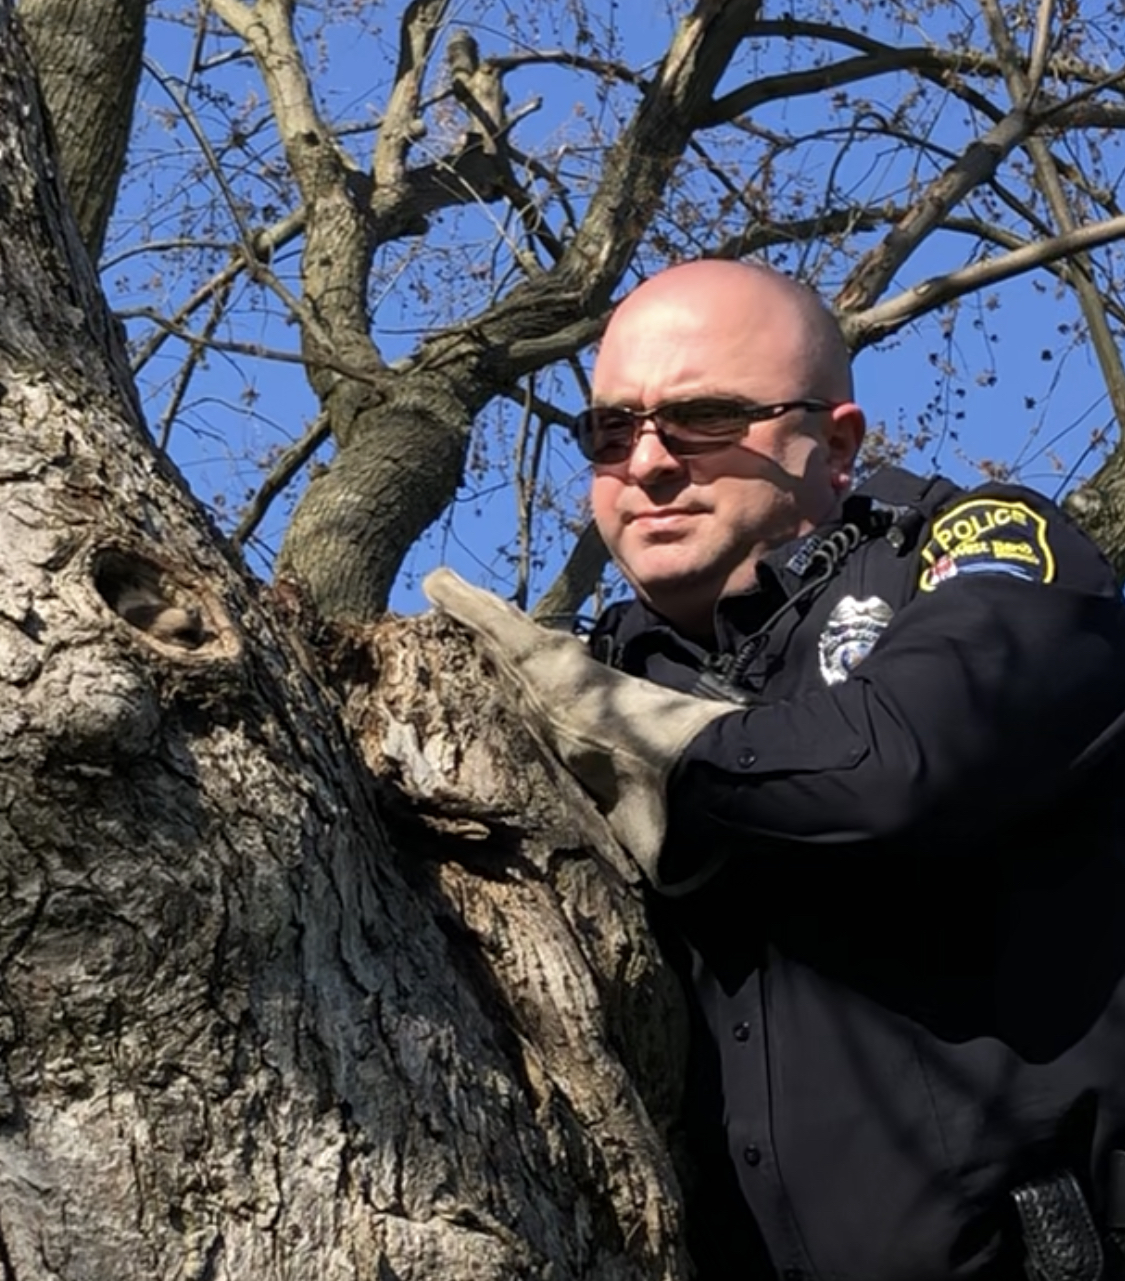 West Bend Police rescue raccoon